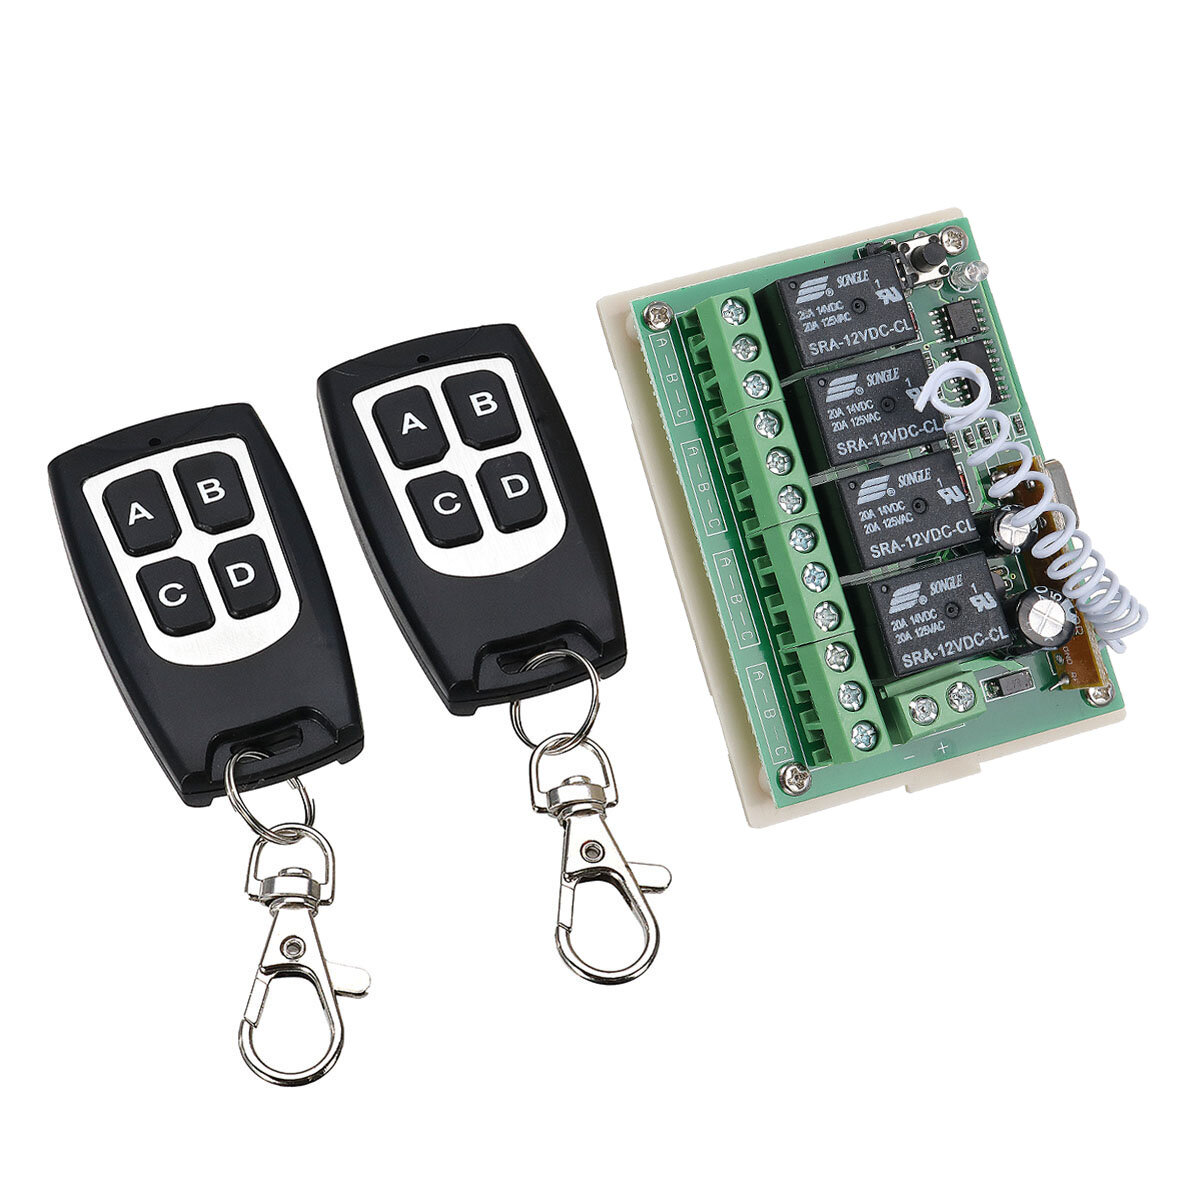 Geekcreit? 12V 4CH Channel 433Mhz Wireless Remote Control Switch With 2 Transmitter